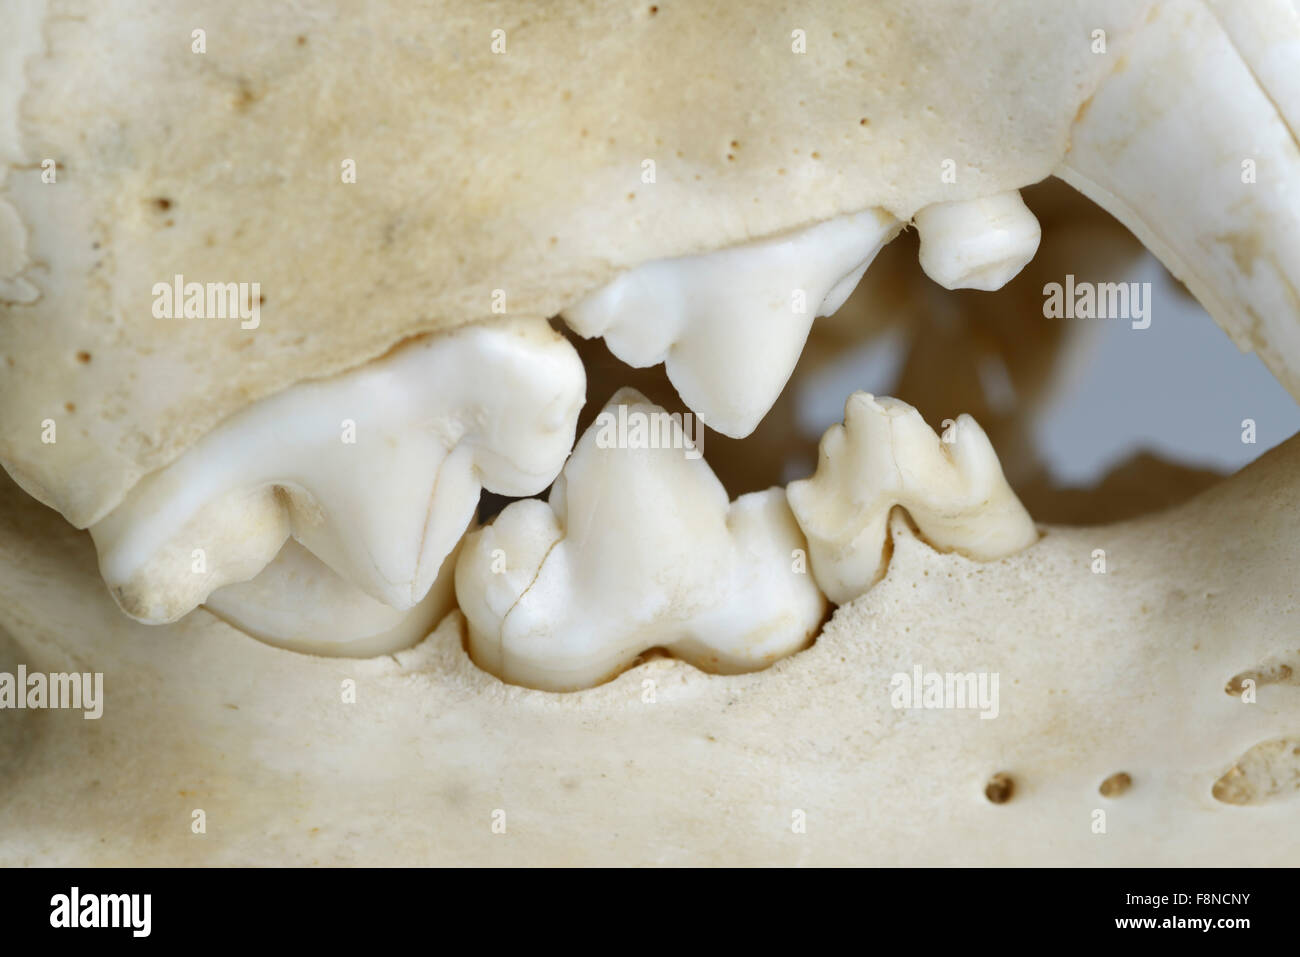 Side view of teeth and skull of a lion showing carnassials for slicing food Stock Photo